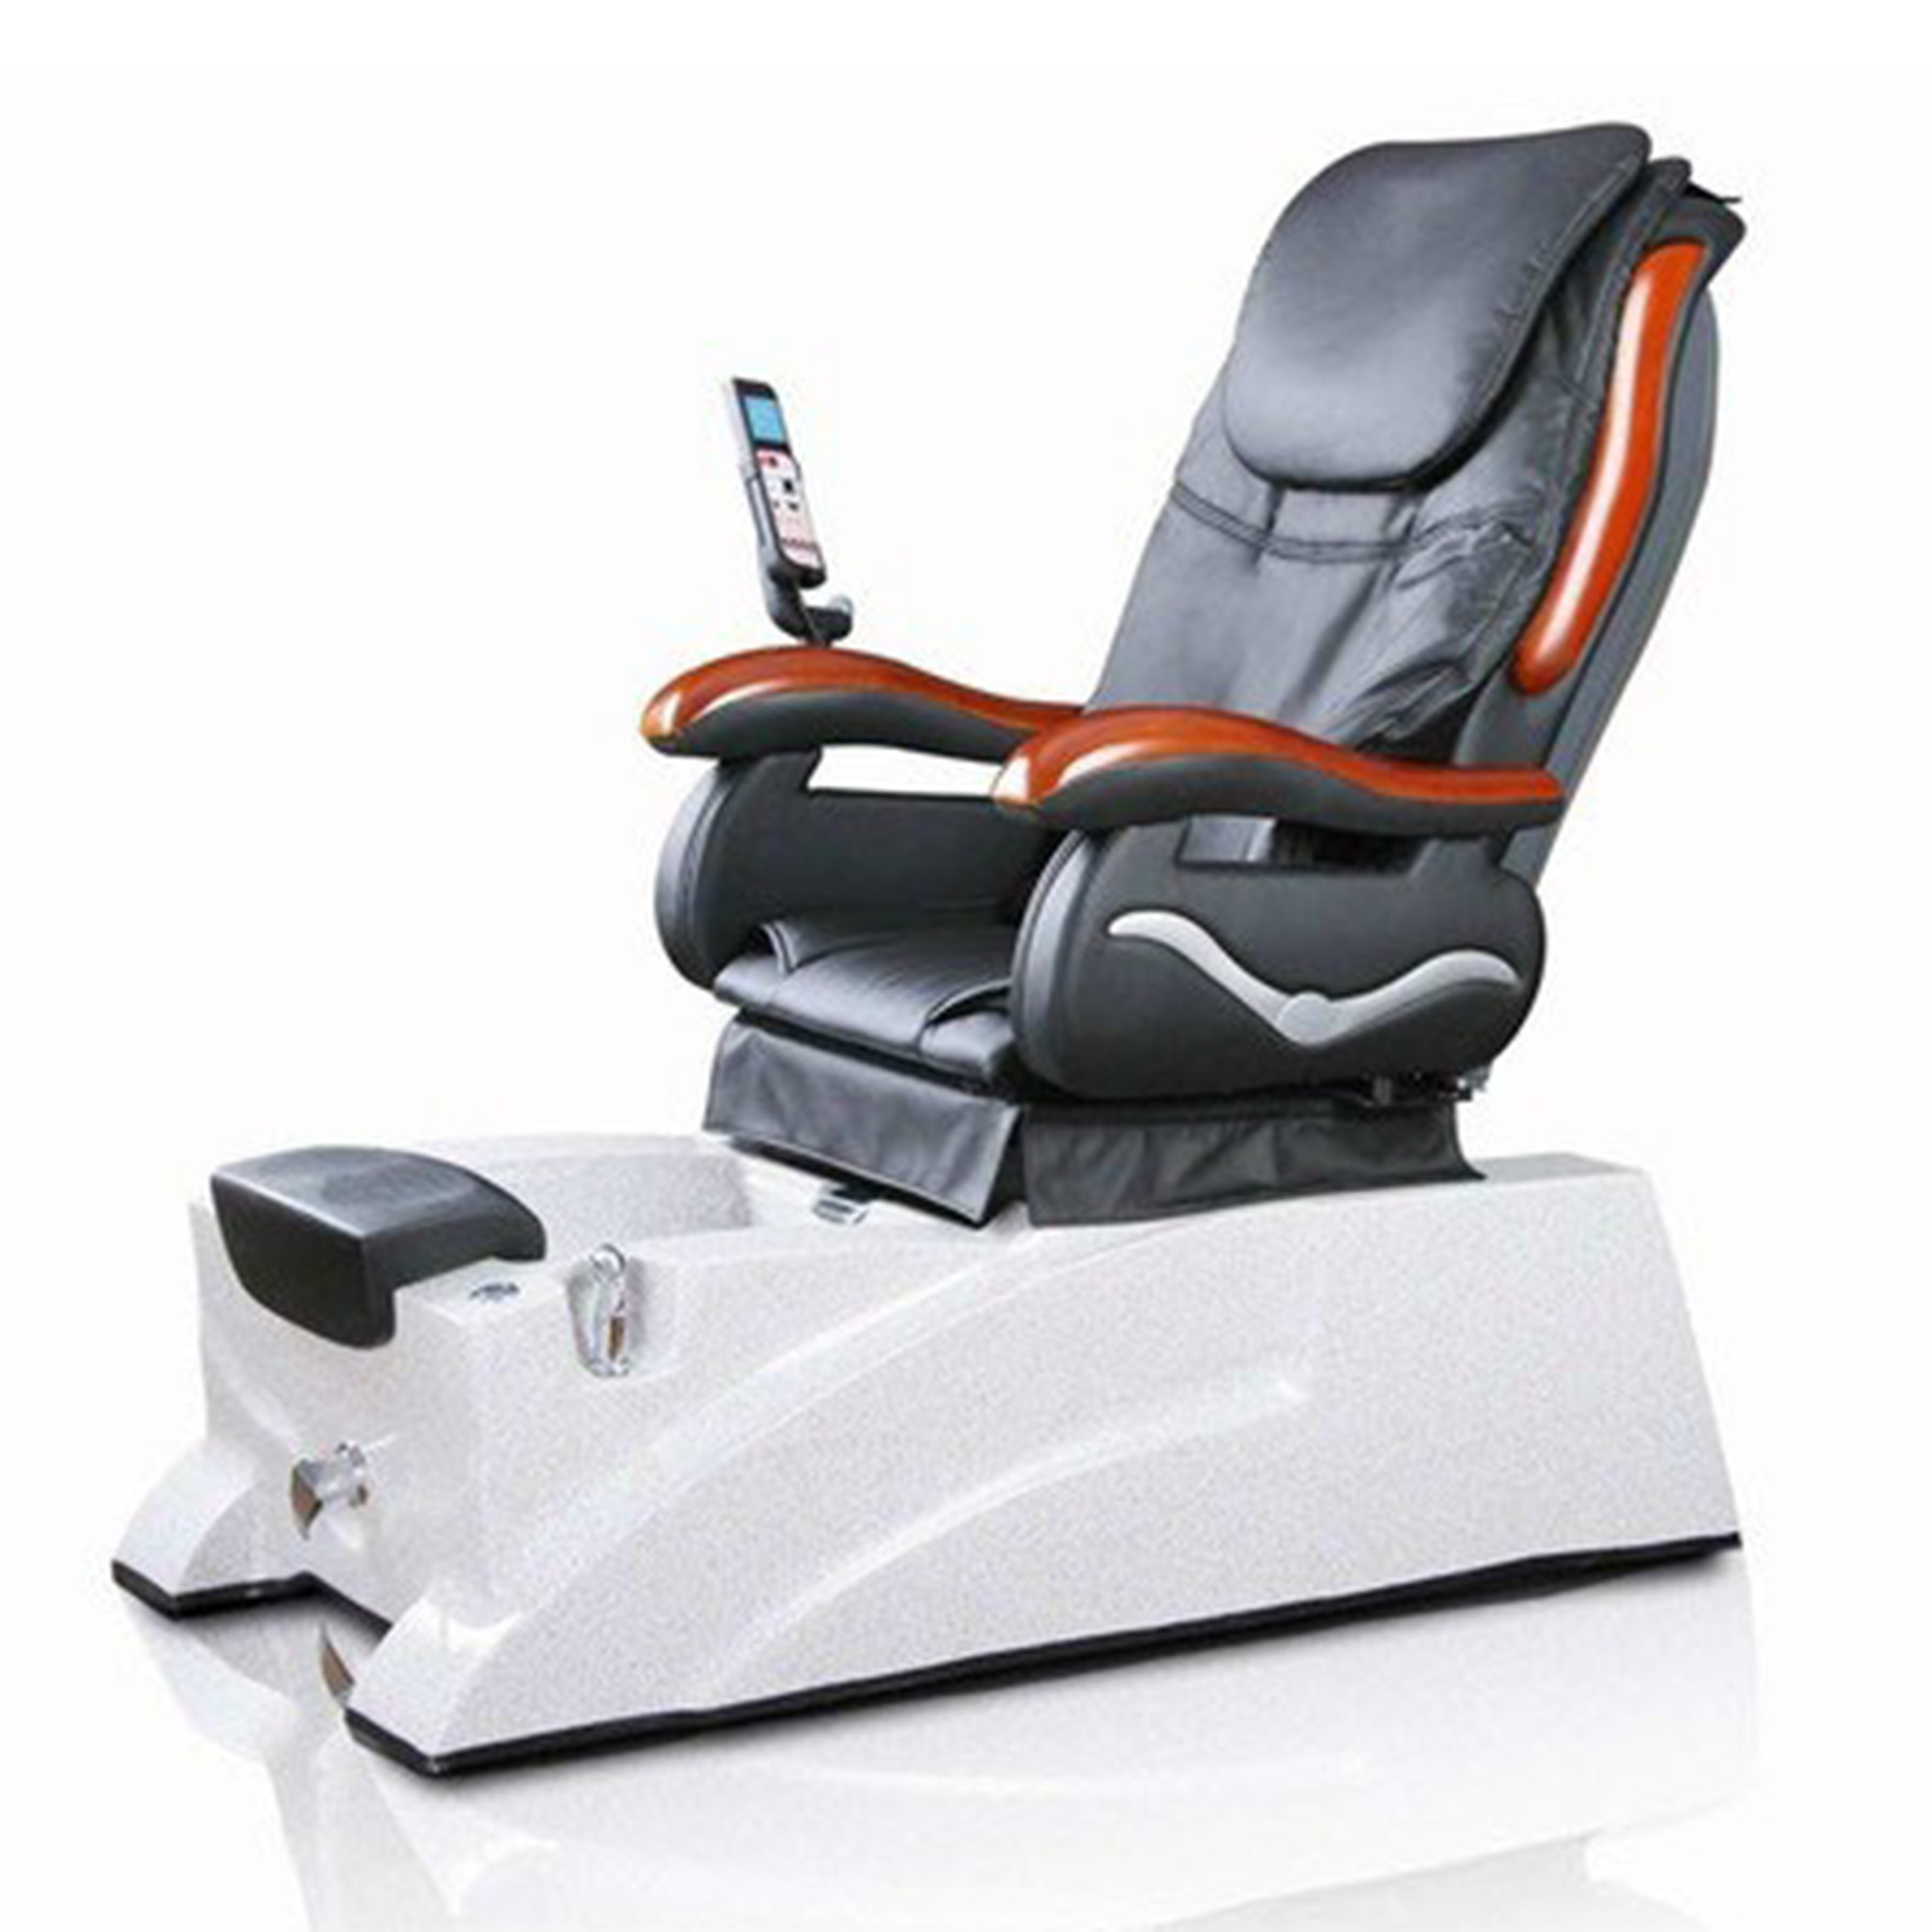 Comfort Pedicure Chair Furniture Stations in Amritsar